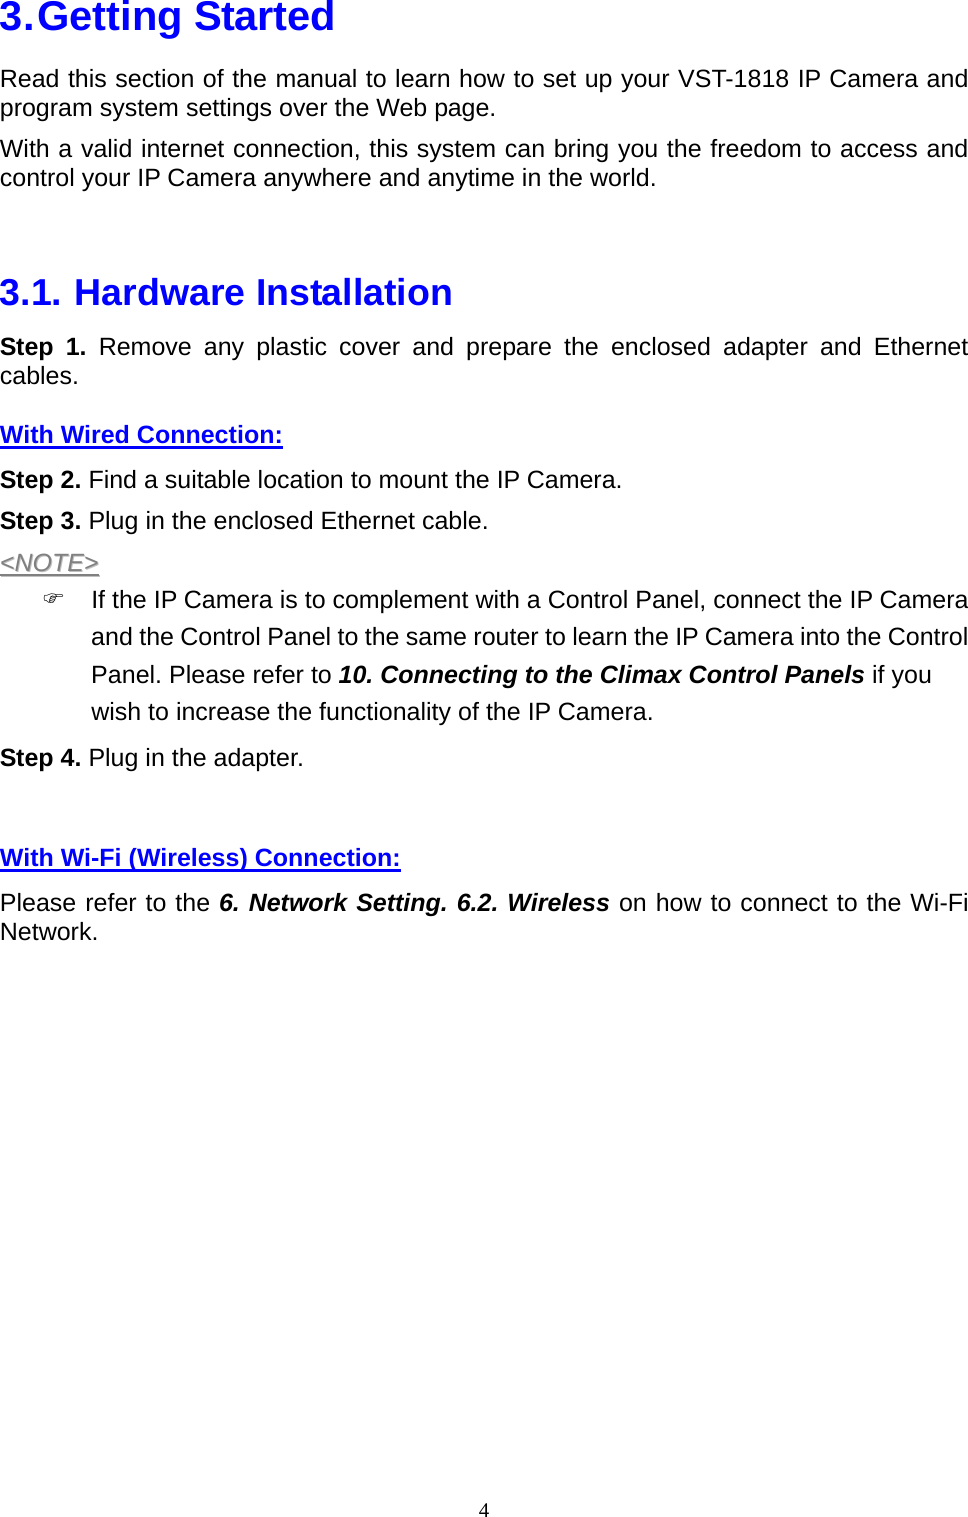 4  3. Getting  Started Read this section of the manual to learn how to set up your VST-1818 IP Camera and program system settings over the Web page. With a valid internet connection, this system can bring you the freedom to access and control your IP Camera anywhere and anytime in the world.  3.1. Hardware Installation Step 1. Remove any plastic cover and prepare the enclosed adapter and Ethernet cables. With Wired Connection: Step 2. Find a suitable location to mount the IP Camera. Step 3. Plug in the enclosed Ethernet cable. &lt;&lt;NNOOTTEE&gt;&gt;  )  If the IP Camera is to complement with a Control Panel, connect the IP Camera and the Control Panel to the same router to learn the IP Camera into the Control Panel. Please refer to 10. Connecting to the Climax Control Panels if you wish to increase the functionality of the IP Camera. Step 4. Plug in the adapter.  With Wi-Fi (Wireless) Connection: Please refer to the 6. Network Setting. 6.2. Wireless on how to connect to the Wi-Fi Network.   